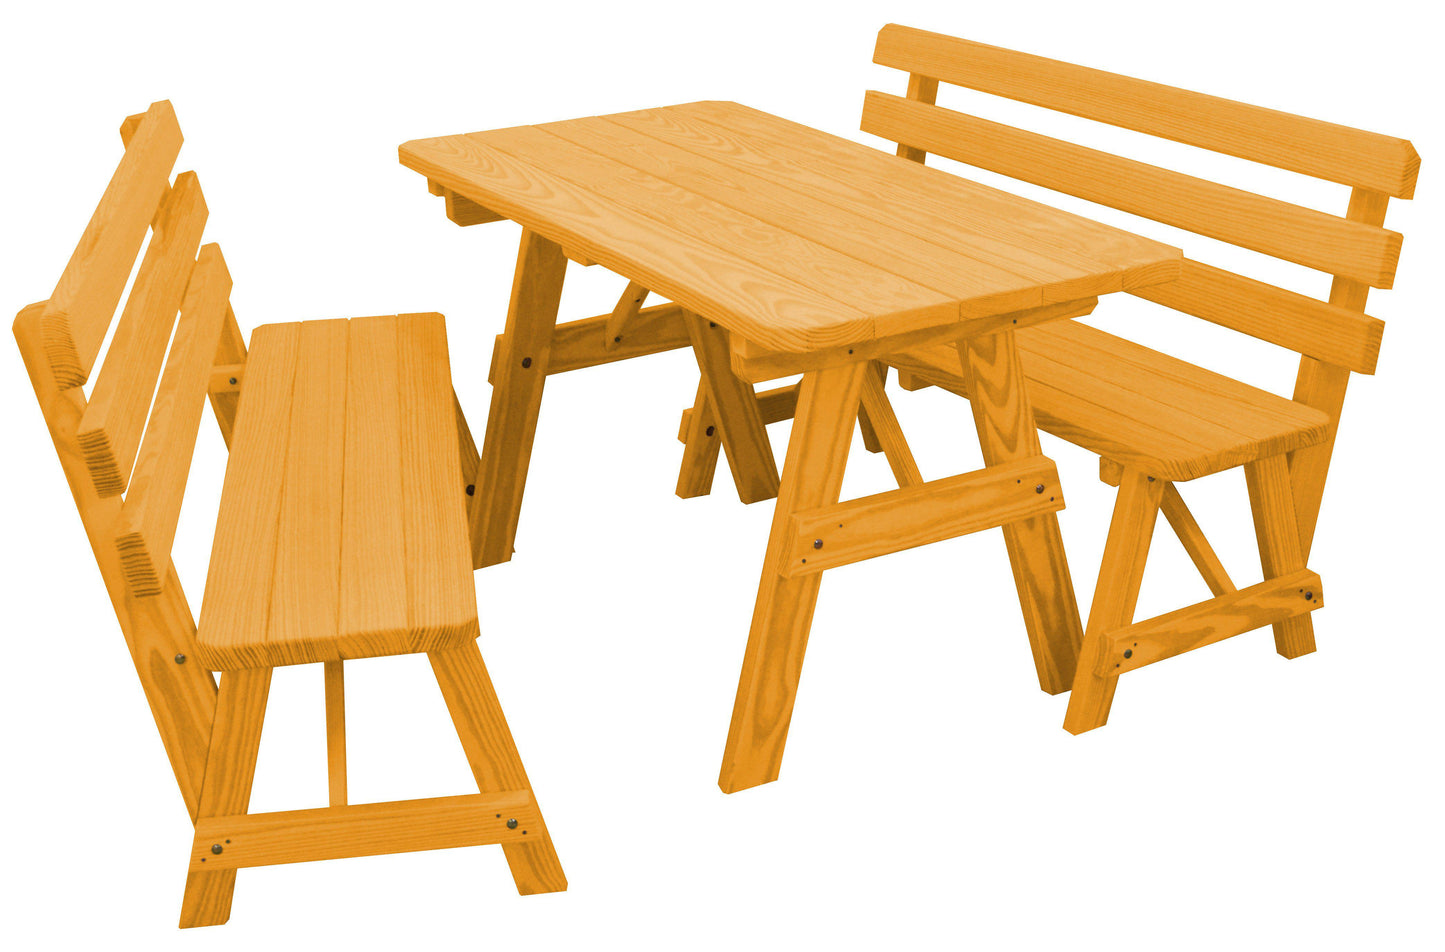 A&L Furniture Co. Yellow Pine 5' Table w/2 Backed Benches - Umbrella Hole - LEAD TIME TO SHIP 10 BUSINESS DAYS